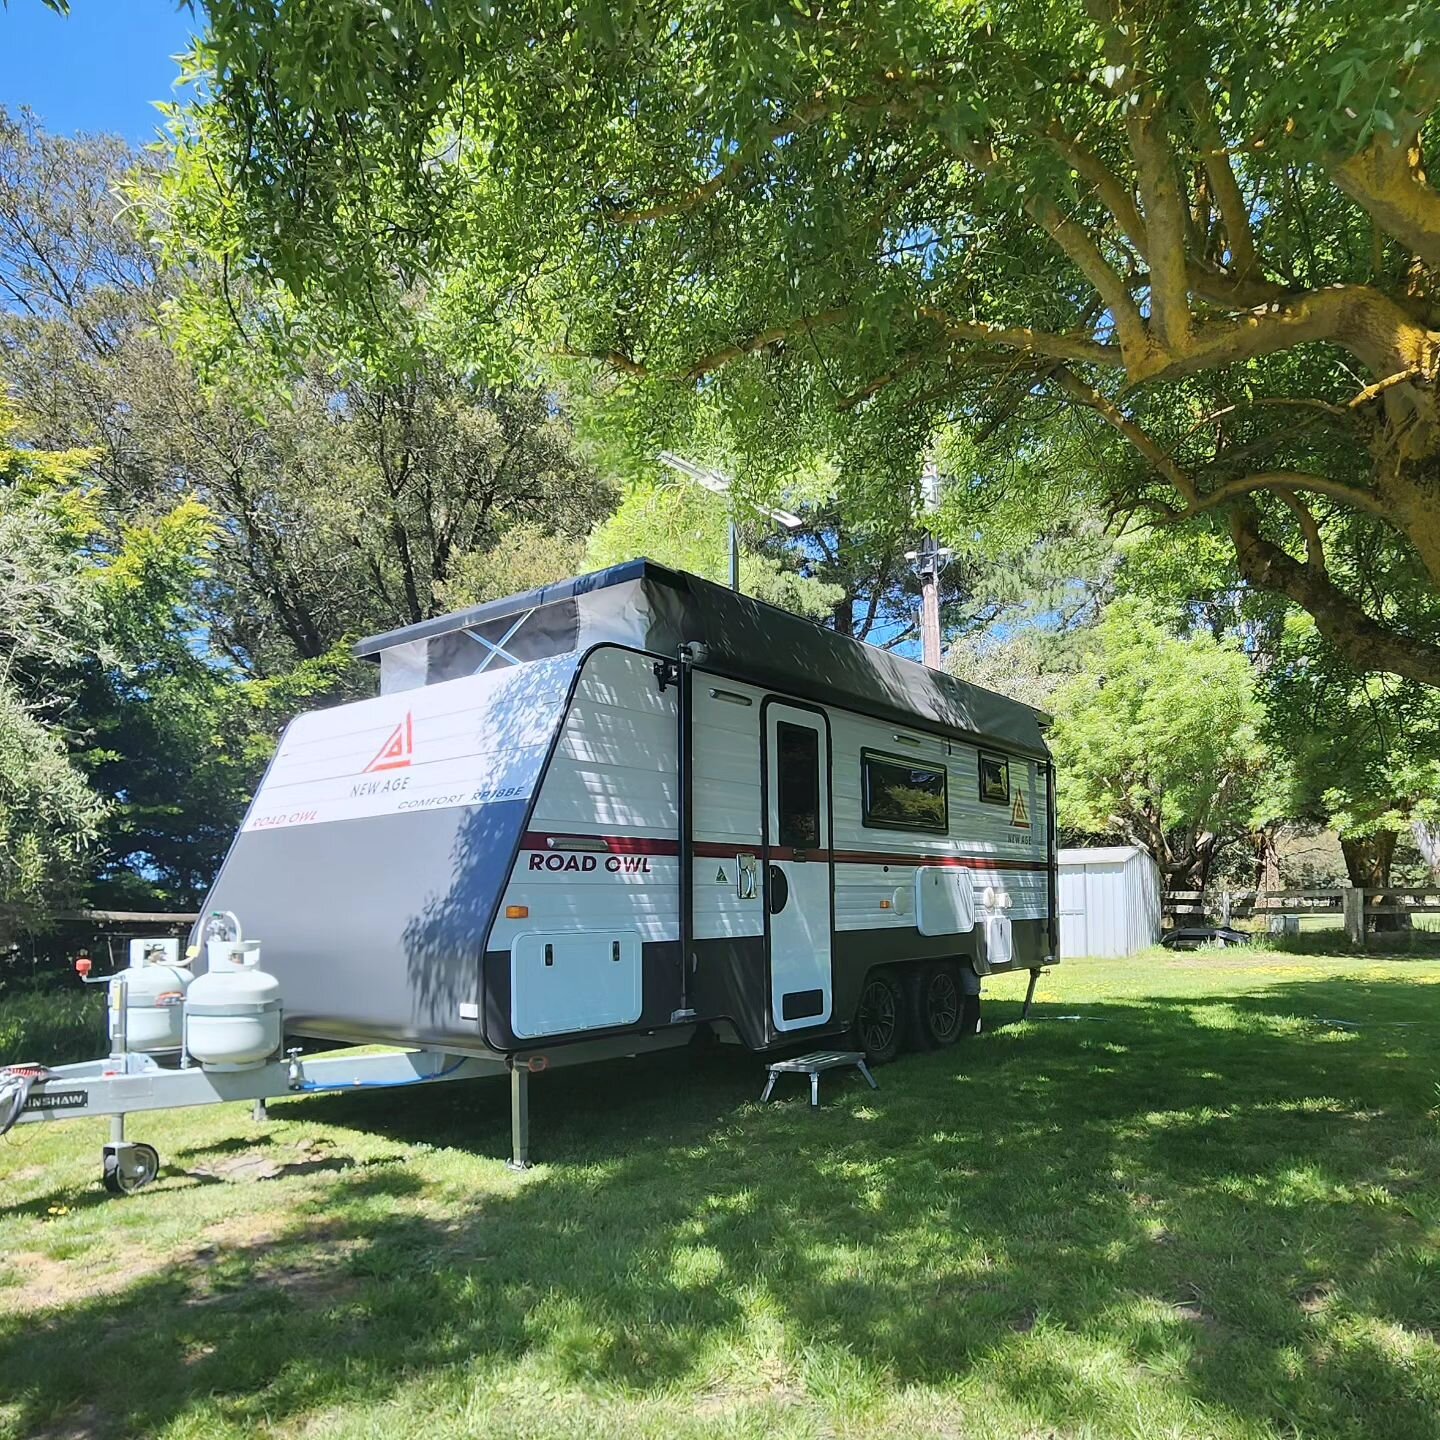 RONNIE all set up for when the family visit 😊. We hope you have a great party with all your family Sally 🥳🍾

www.adventurecaravanhire.com.au

#adventurecaravanhire #extraaccommodation #ballaratsmallbusiness #ballarat #jaycoaustralia #jayco #family